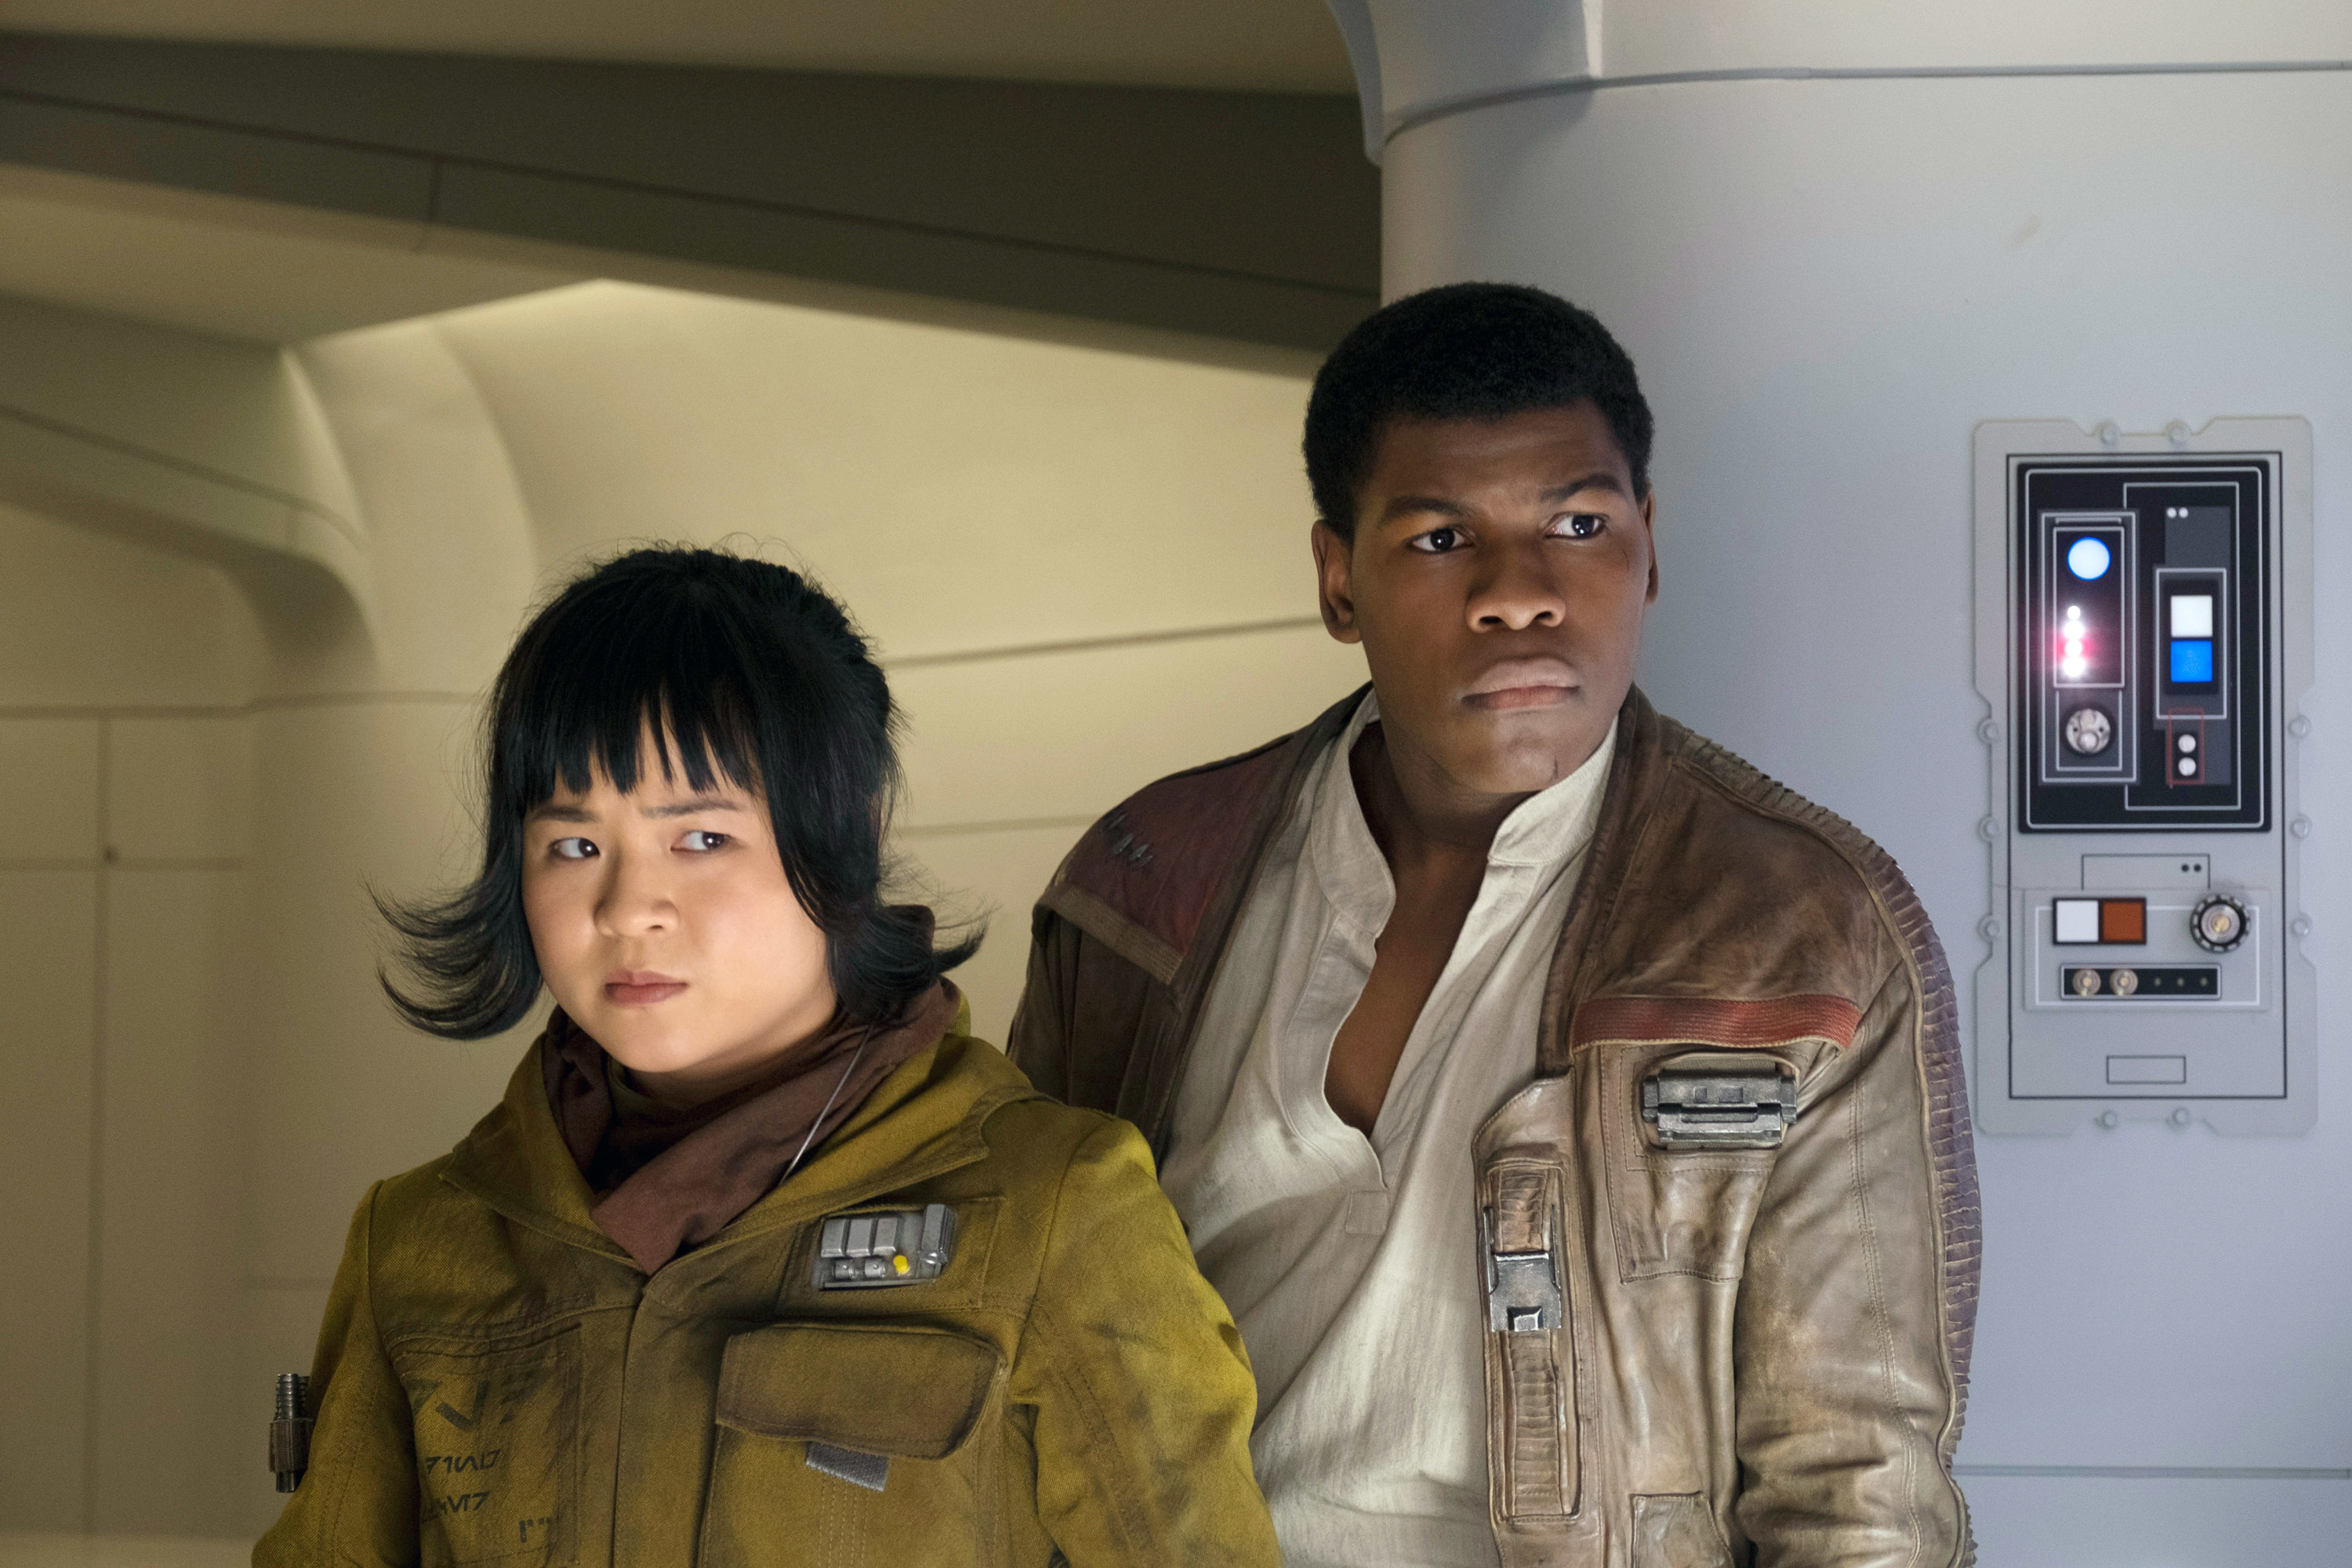 closeup of both of their characters standing inside a spaceship